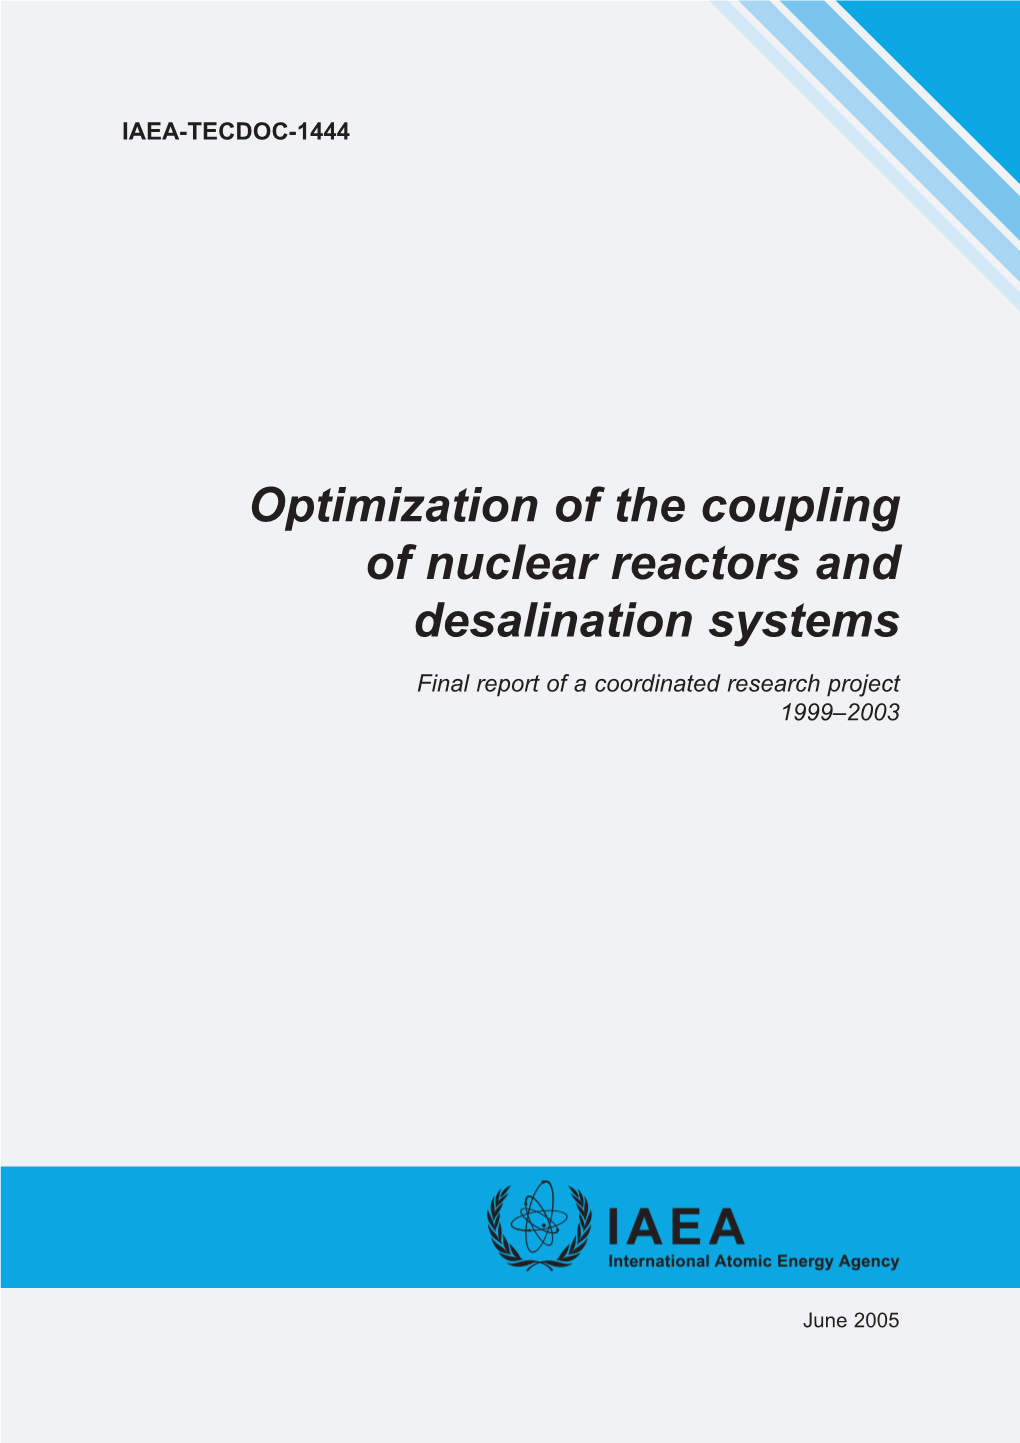 Optimization of the Coupling of Nuclear Reactors and Desalination Systems